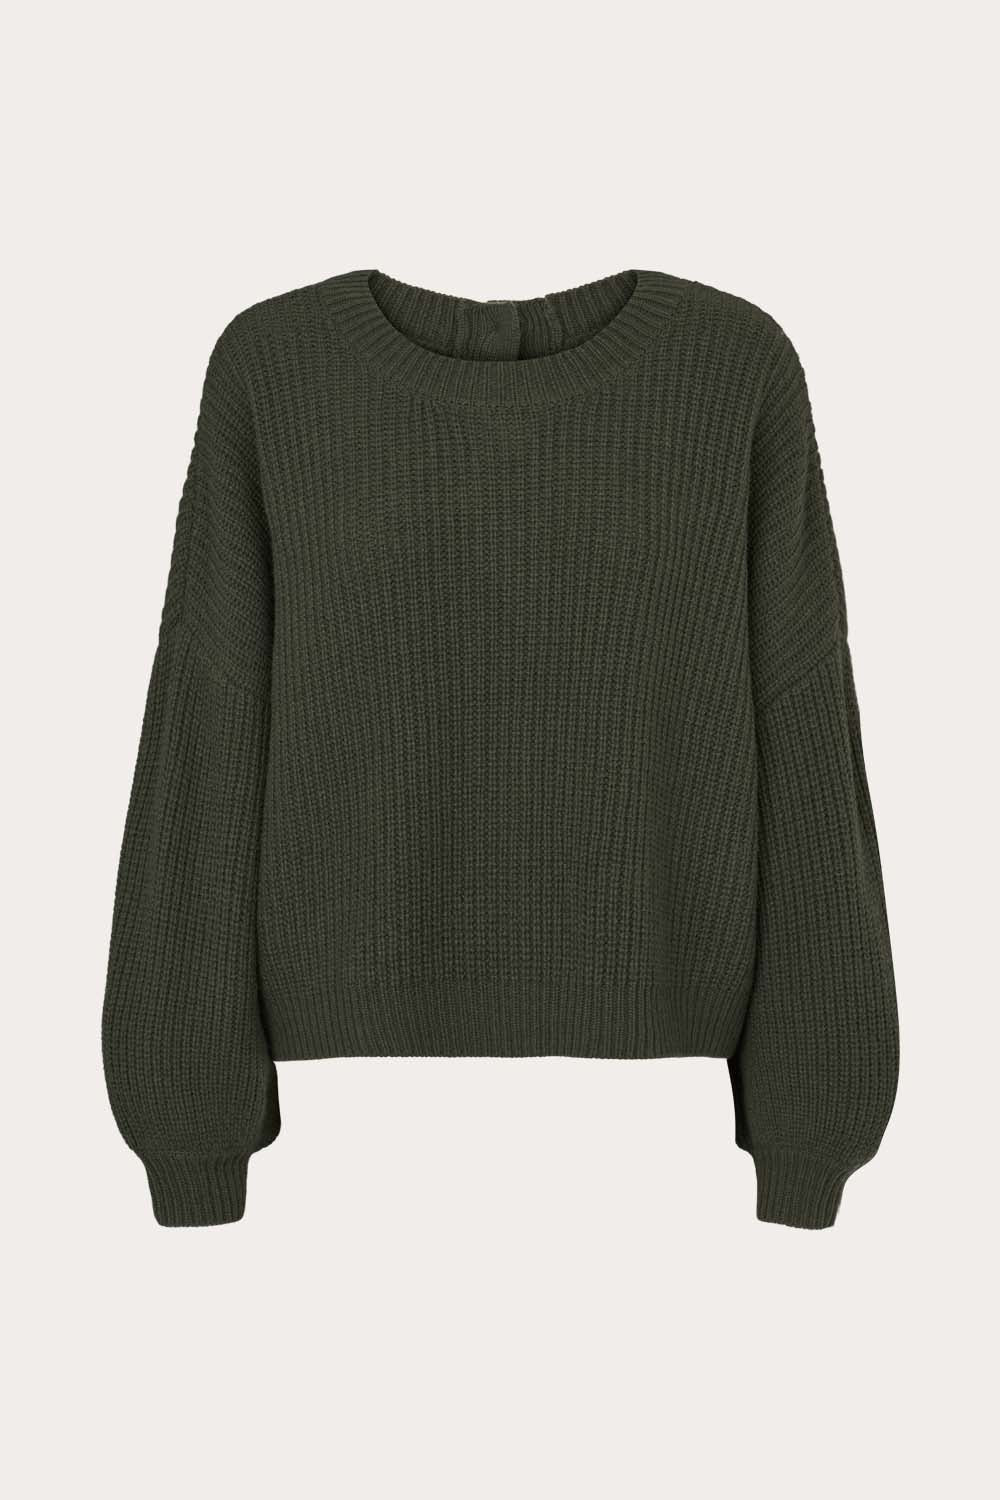 O'TAY Debby Sweater Bluser Hunting Green